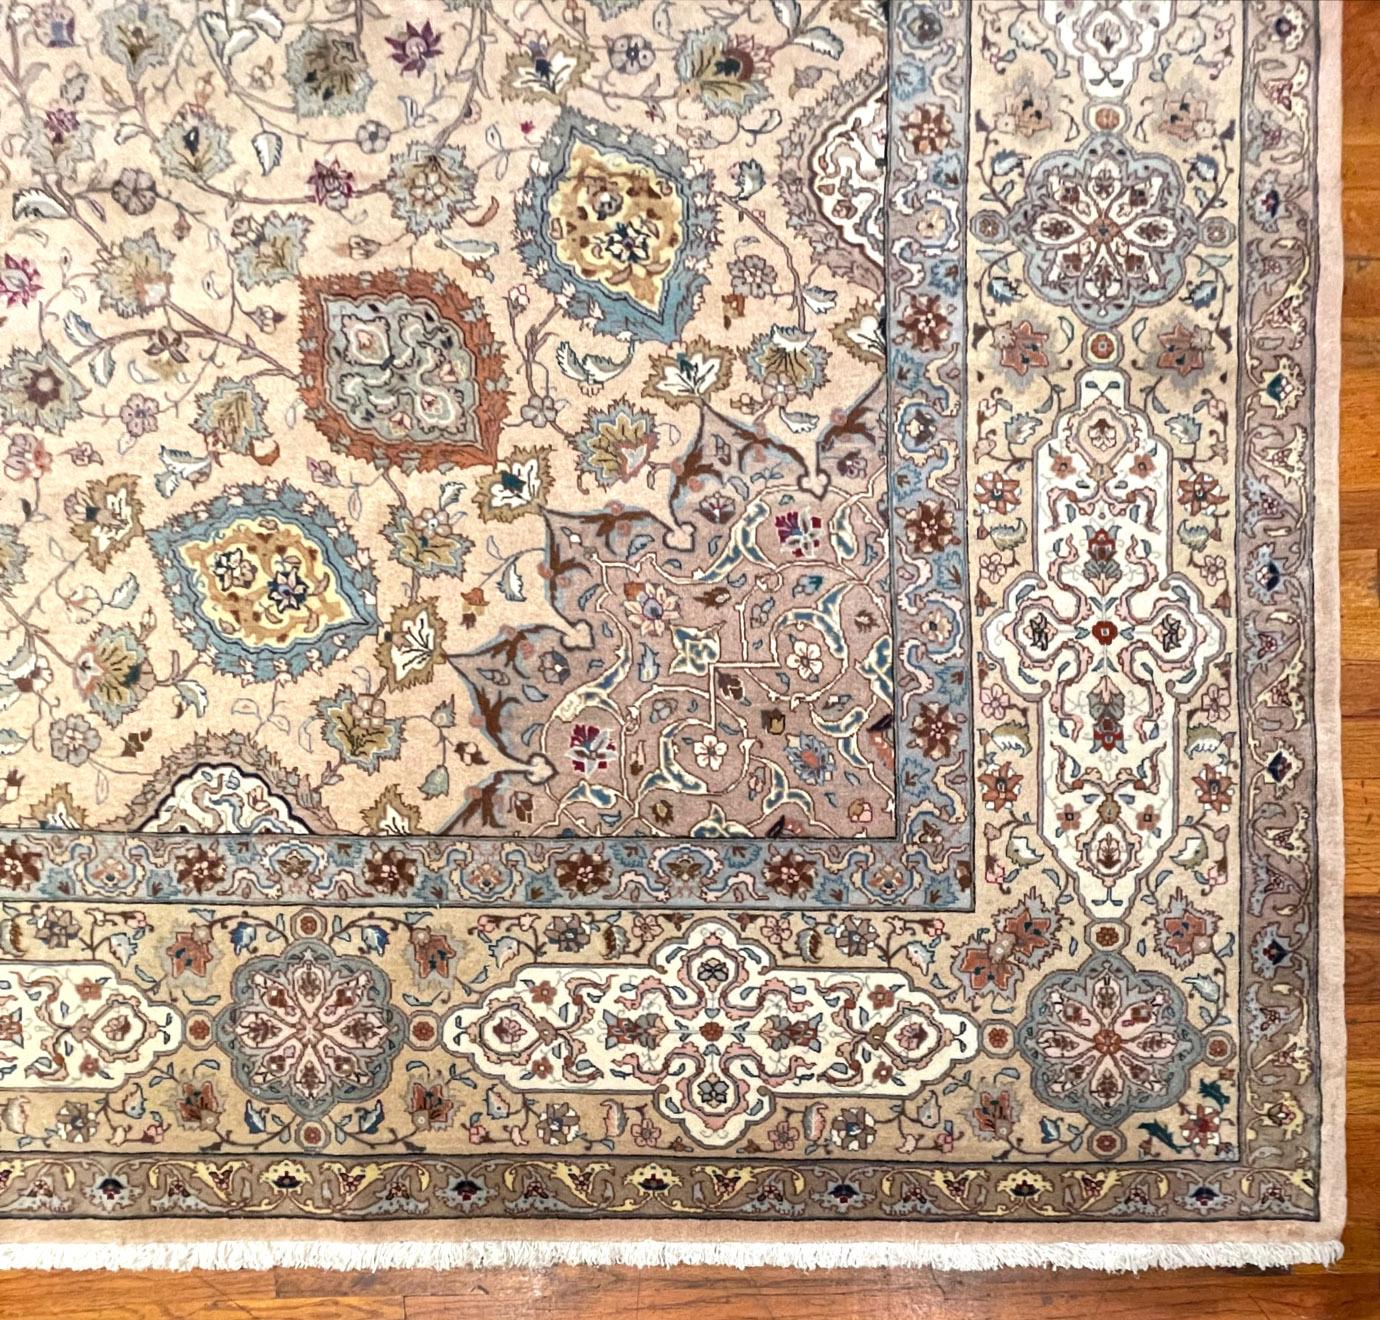 Authentic Persian Hand Knotted Floral Sheikh Safi Design Tabriz Rug, 1970 For Sale 6